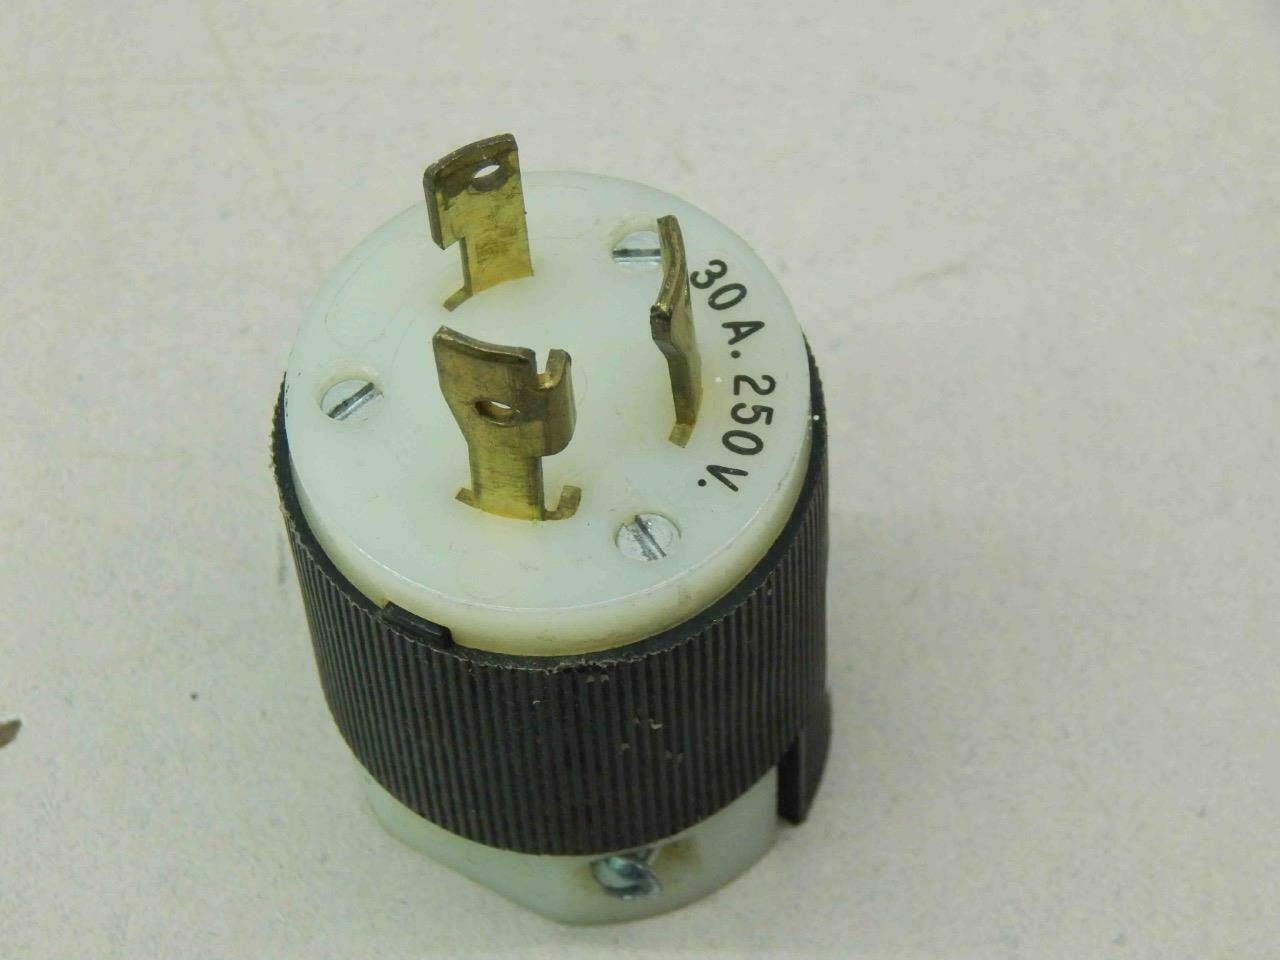 Hubbell 231A Twist Lock Female Plug 20a 250v for sale online 